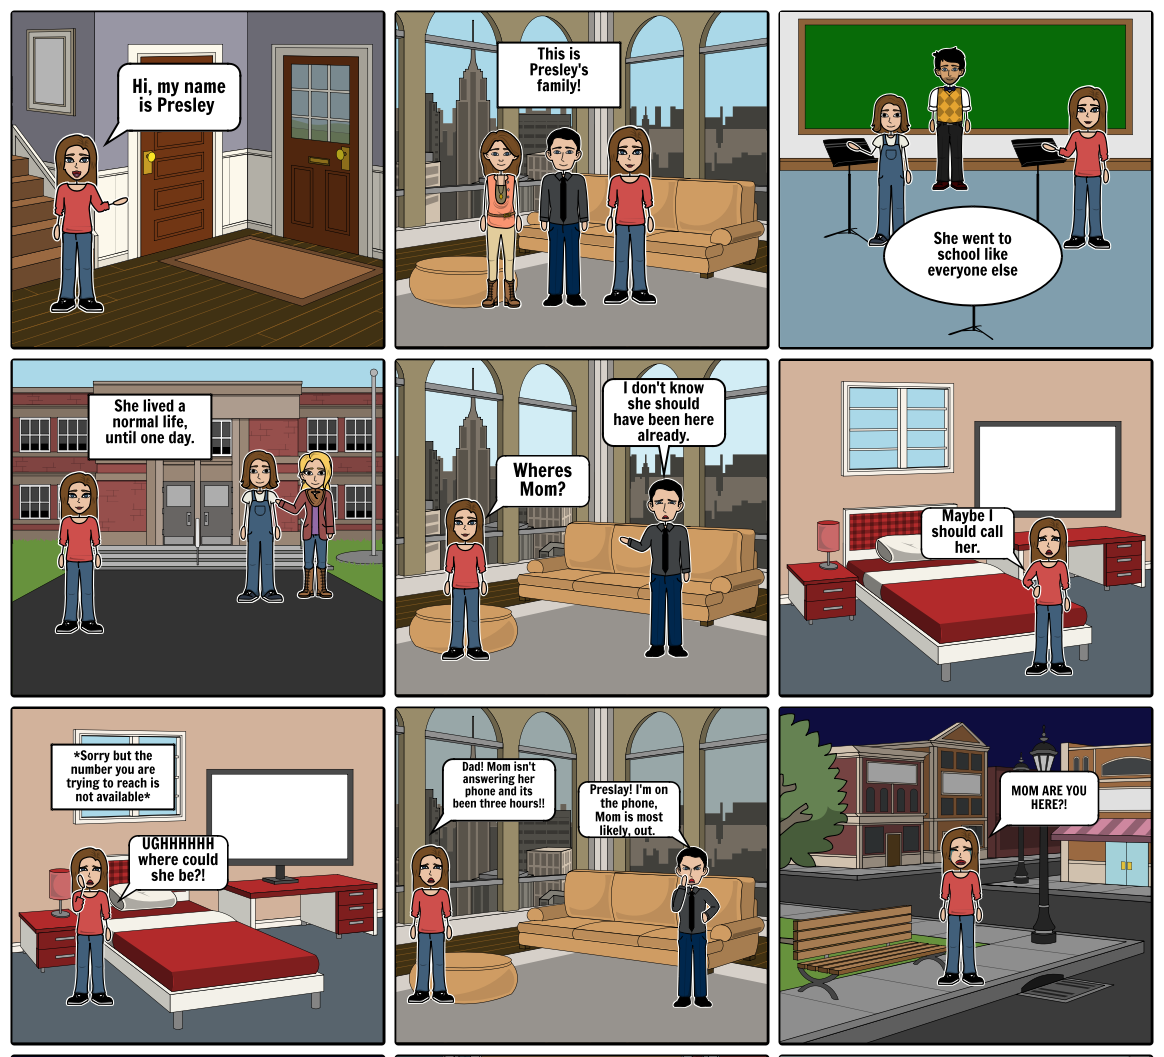 Storytelling with Digital Graphic Novels | KQED